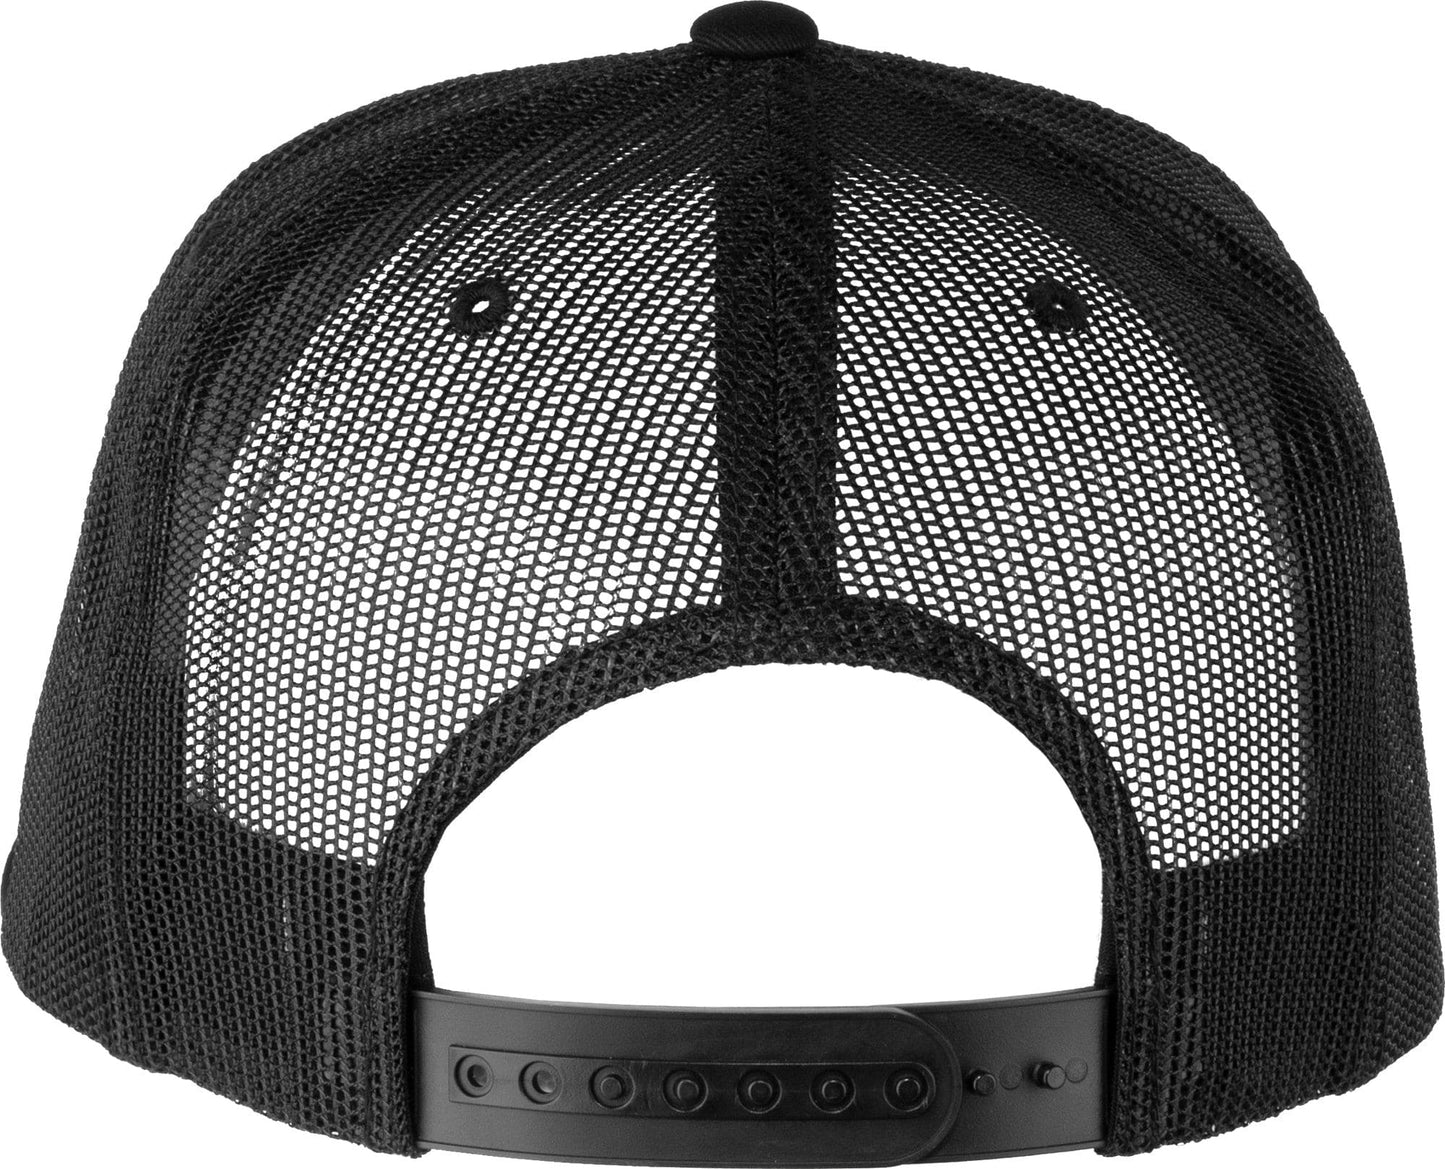 Powell Peralta | Winged Ripper Snap Back Hat - Black